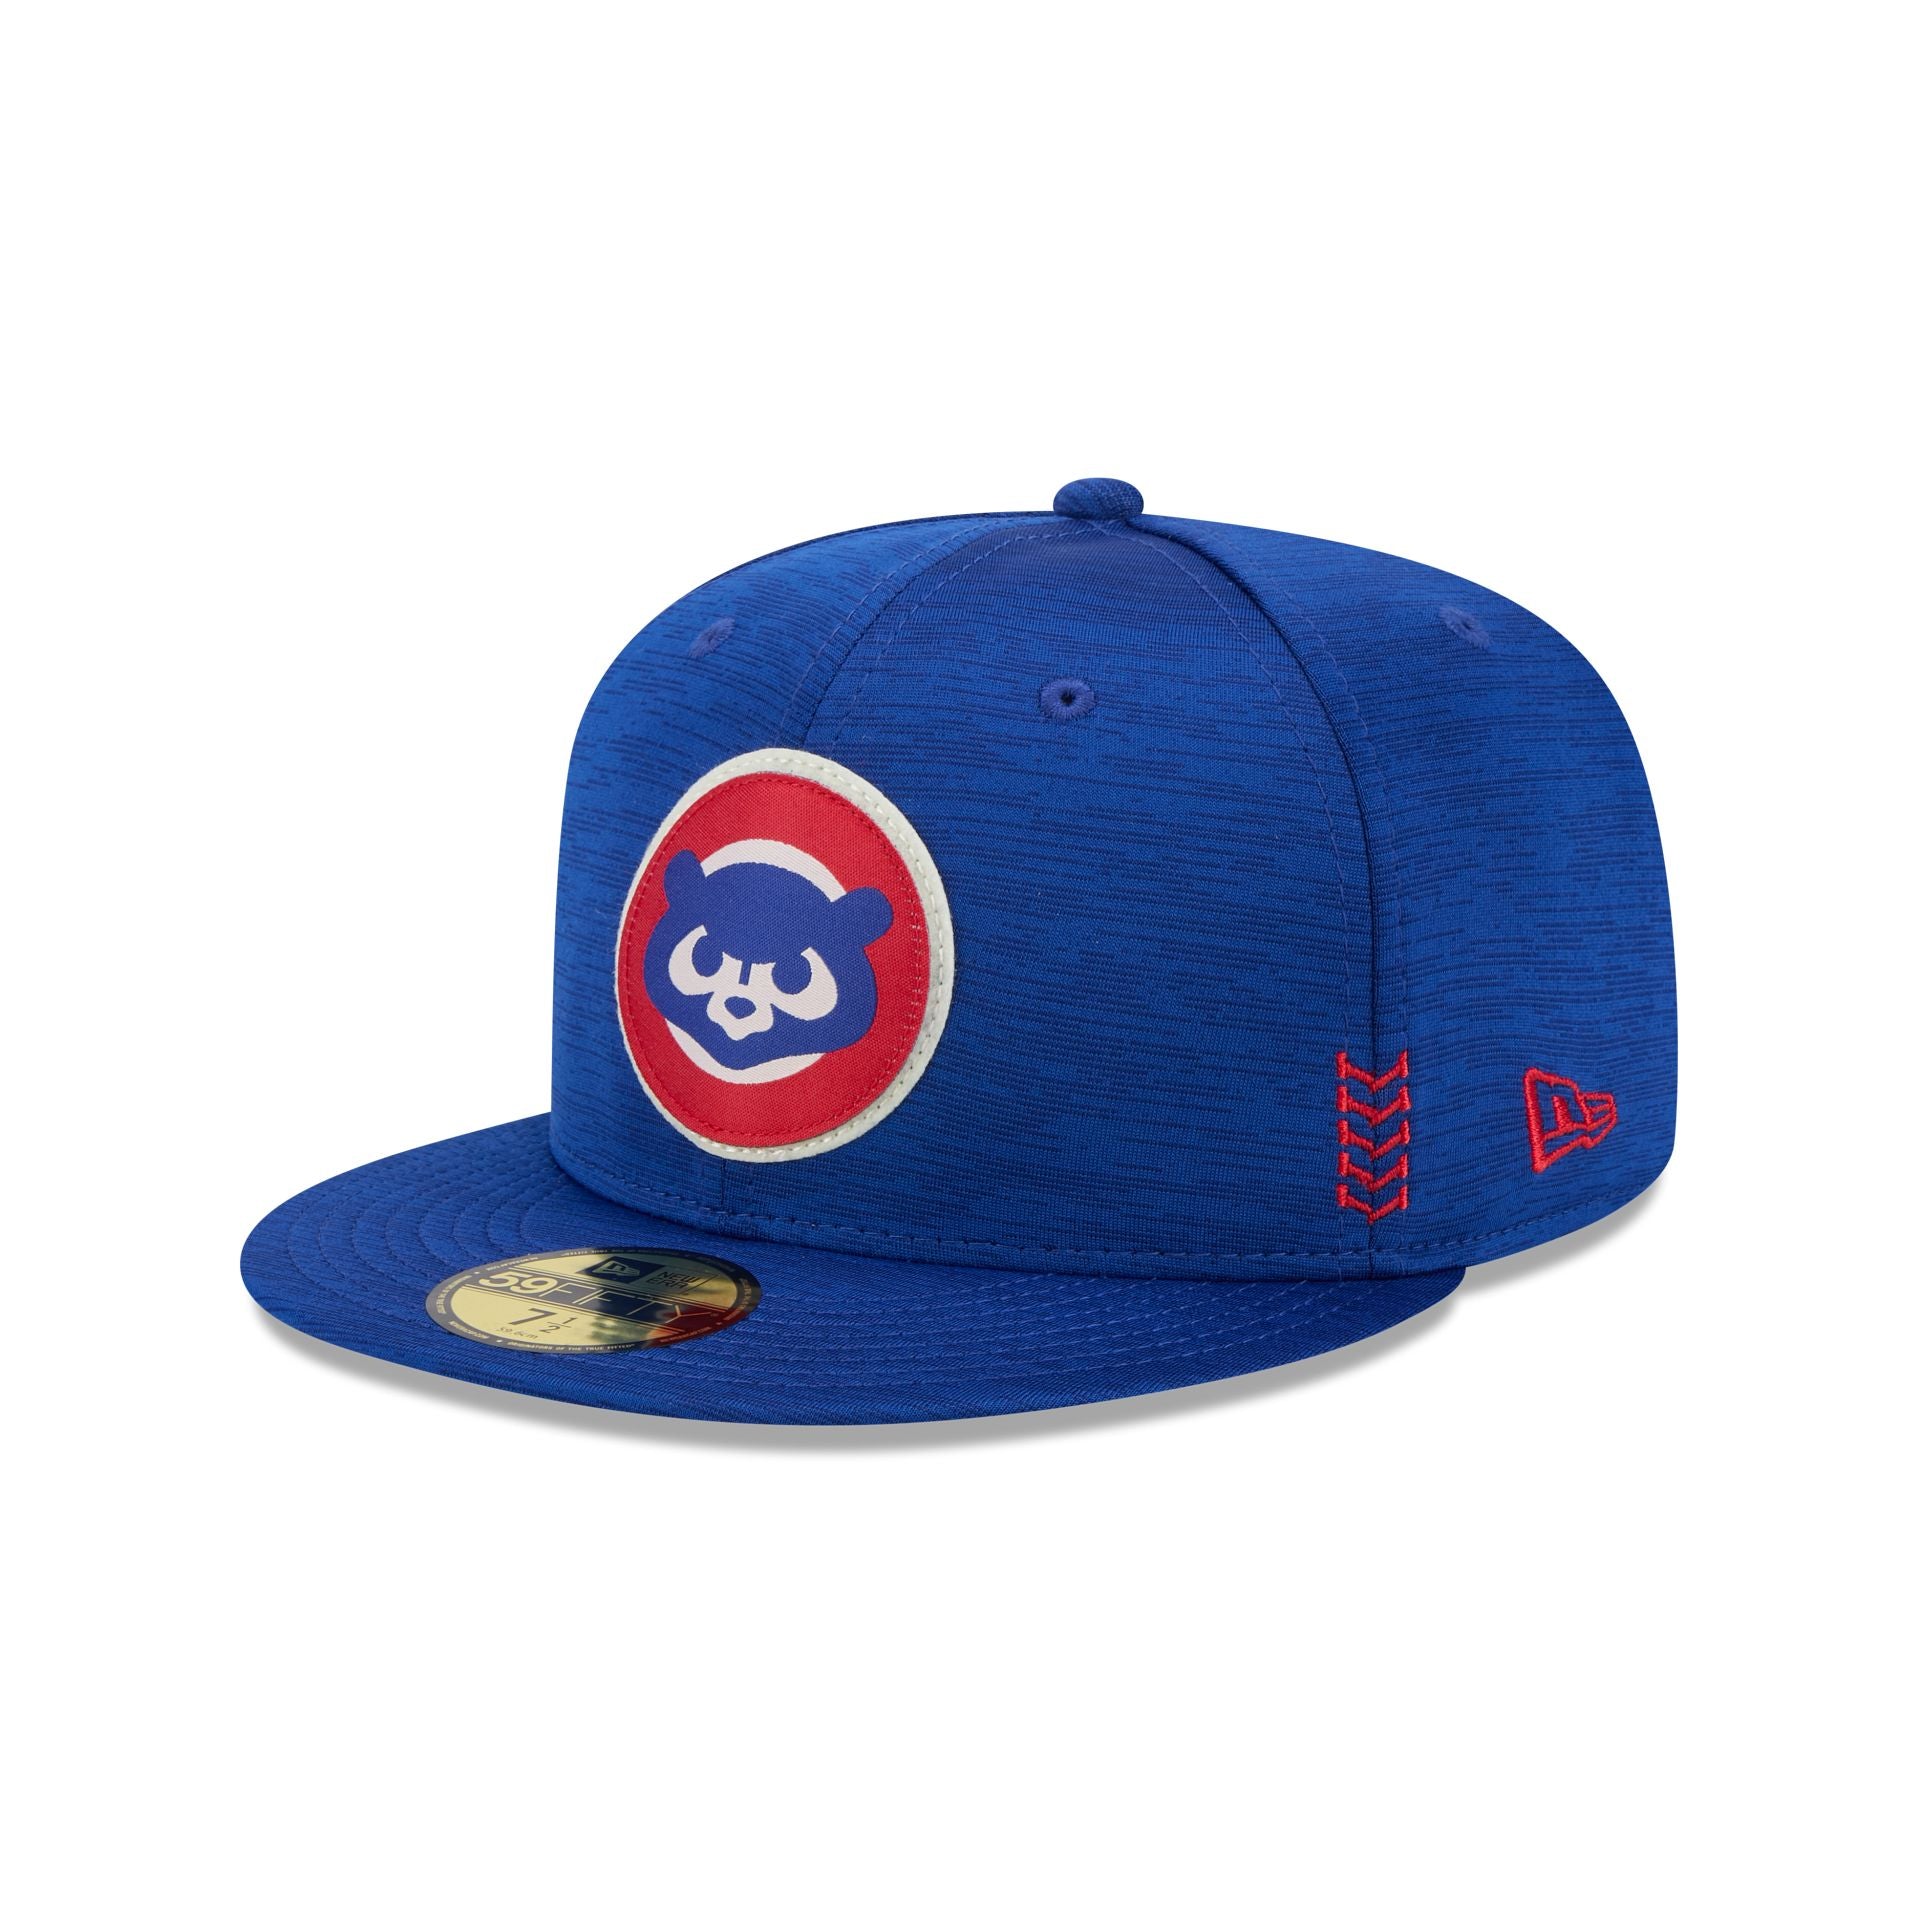 OFF-WHITE x MLB Chicago Cubs Cap Blue/Red/White